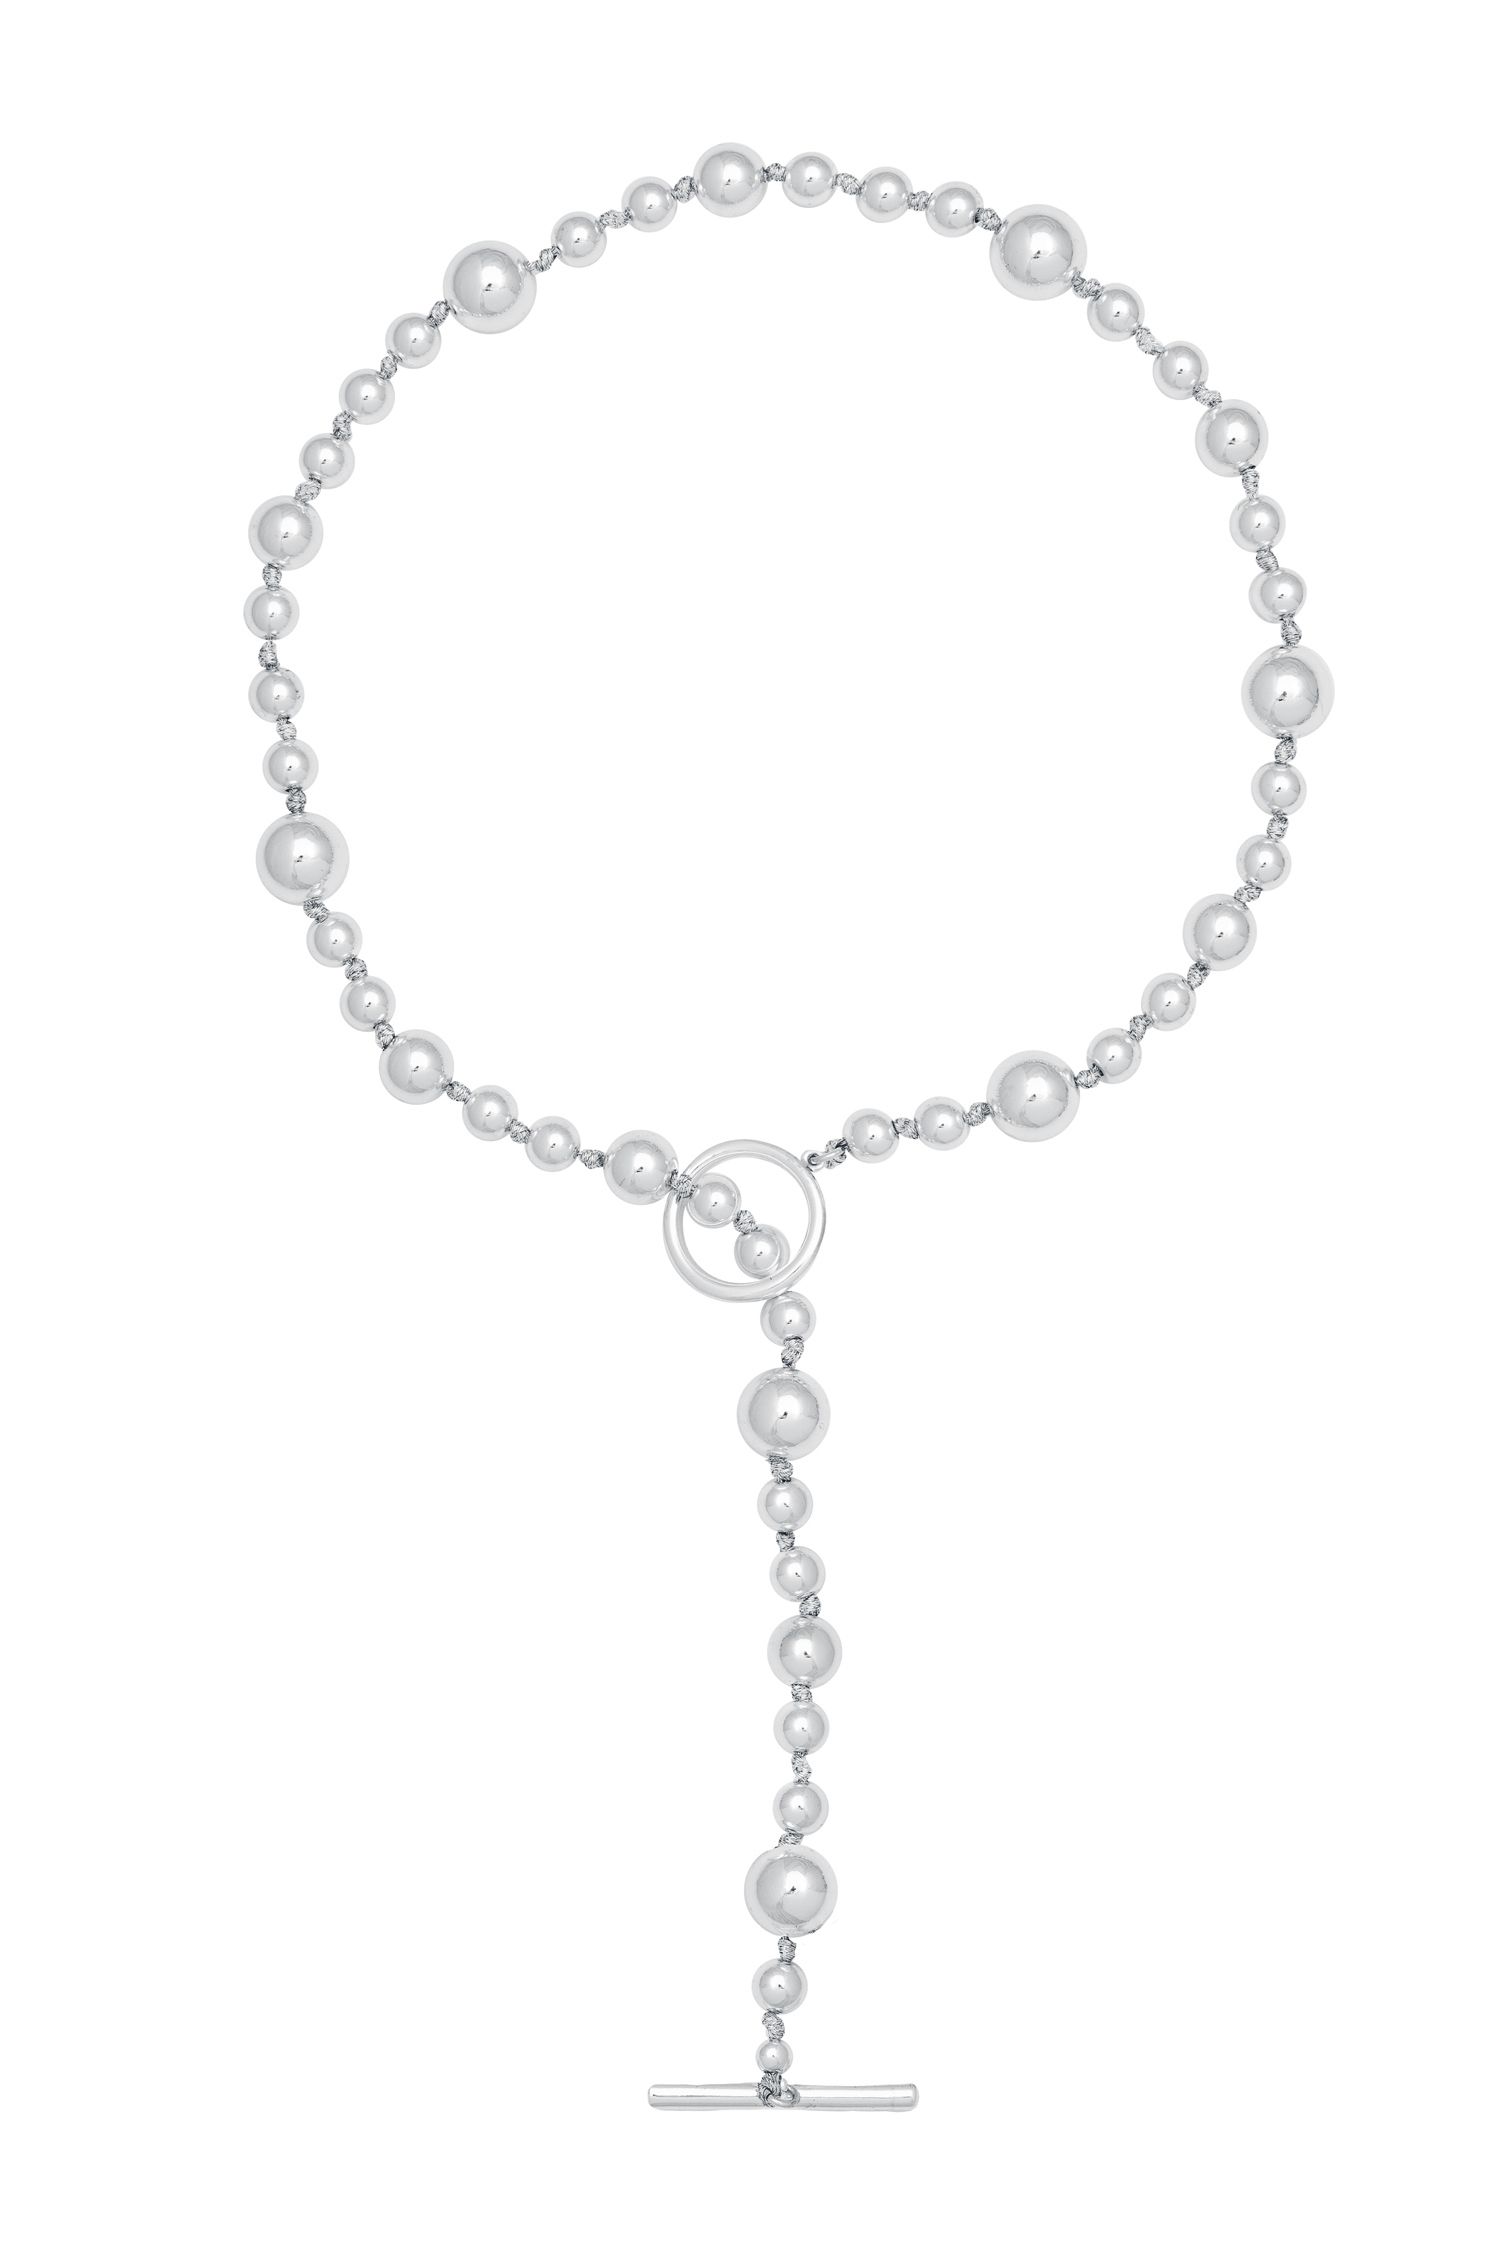 The Silver Artisan Ball Necklace is a classic piece that can be worn with any outfit. Featuring a chain of silver plated balls on a front hoop and bar fastening, it is an elegant way to add glamour or style to any occasion. Measuring 17cm in total length but can be worn at any length with a drop.